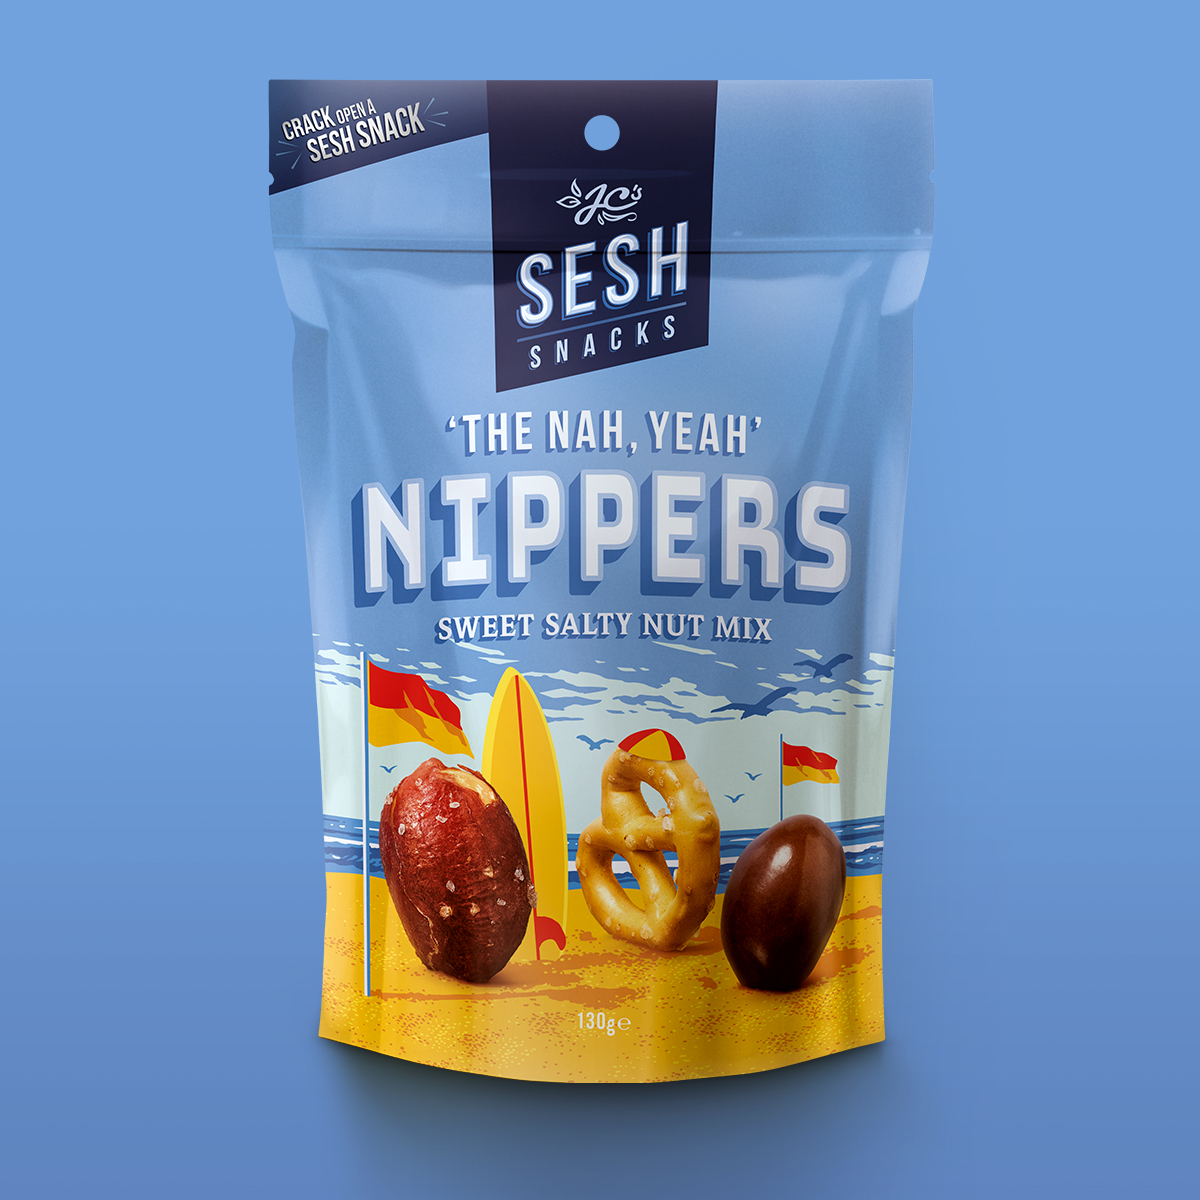 JC's Sesh Snacks - Nippers front of pack design